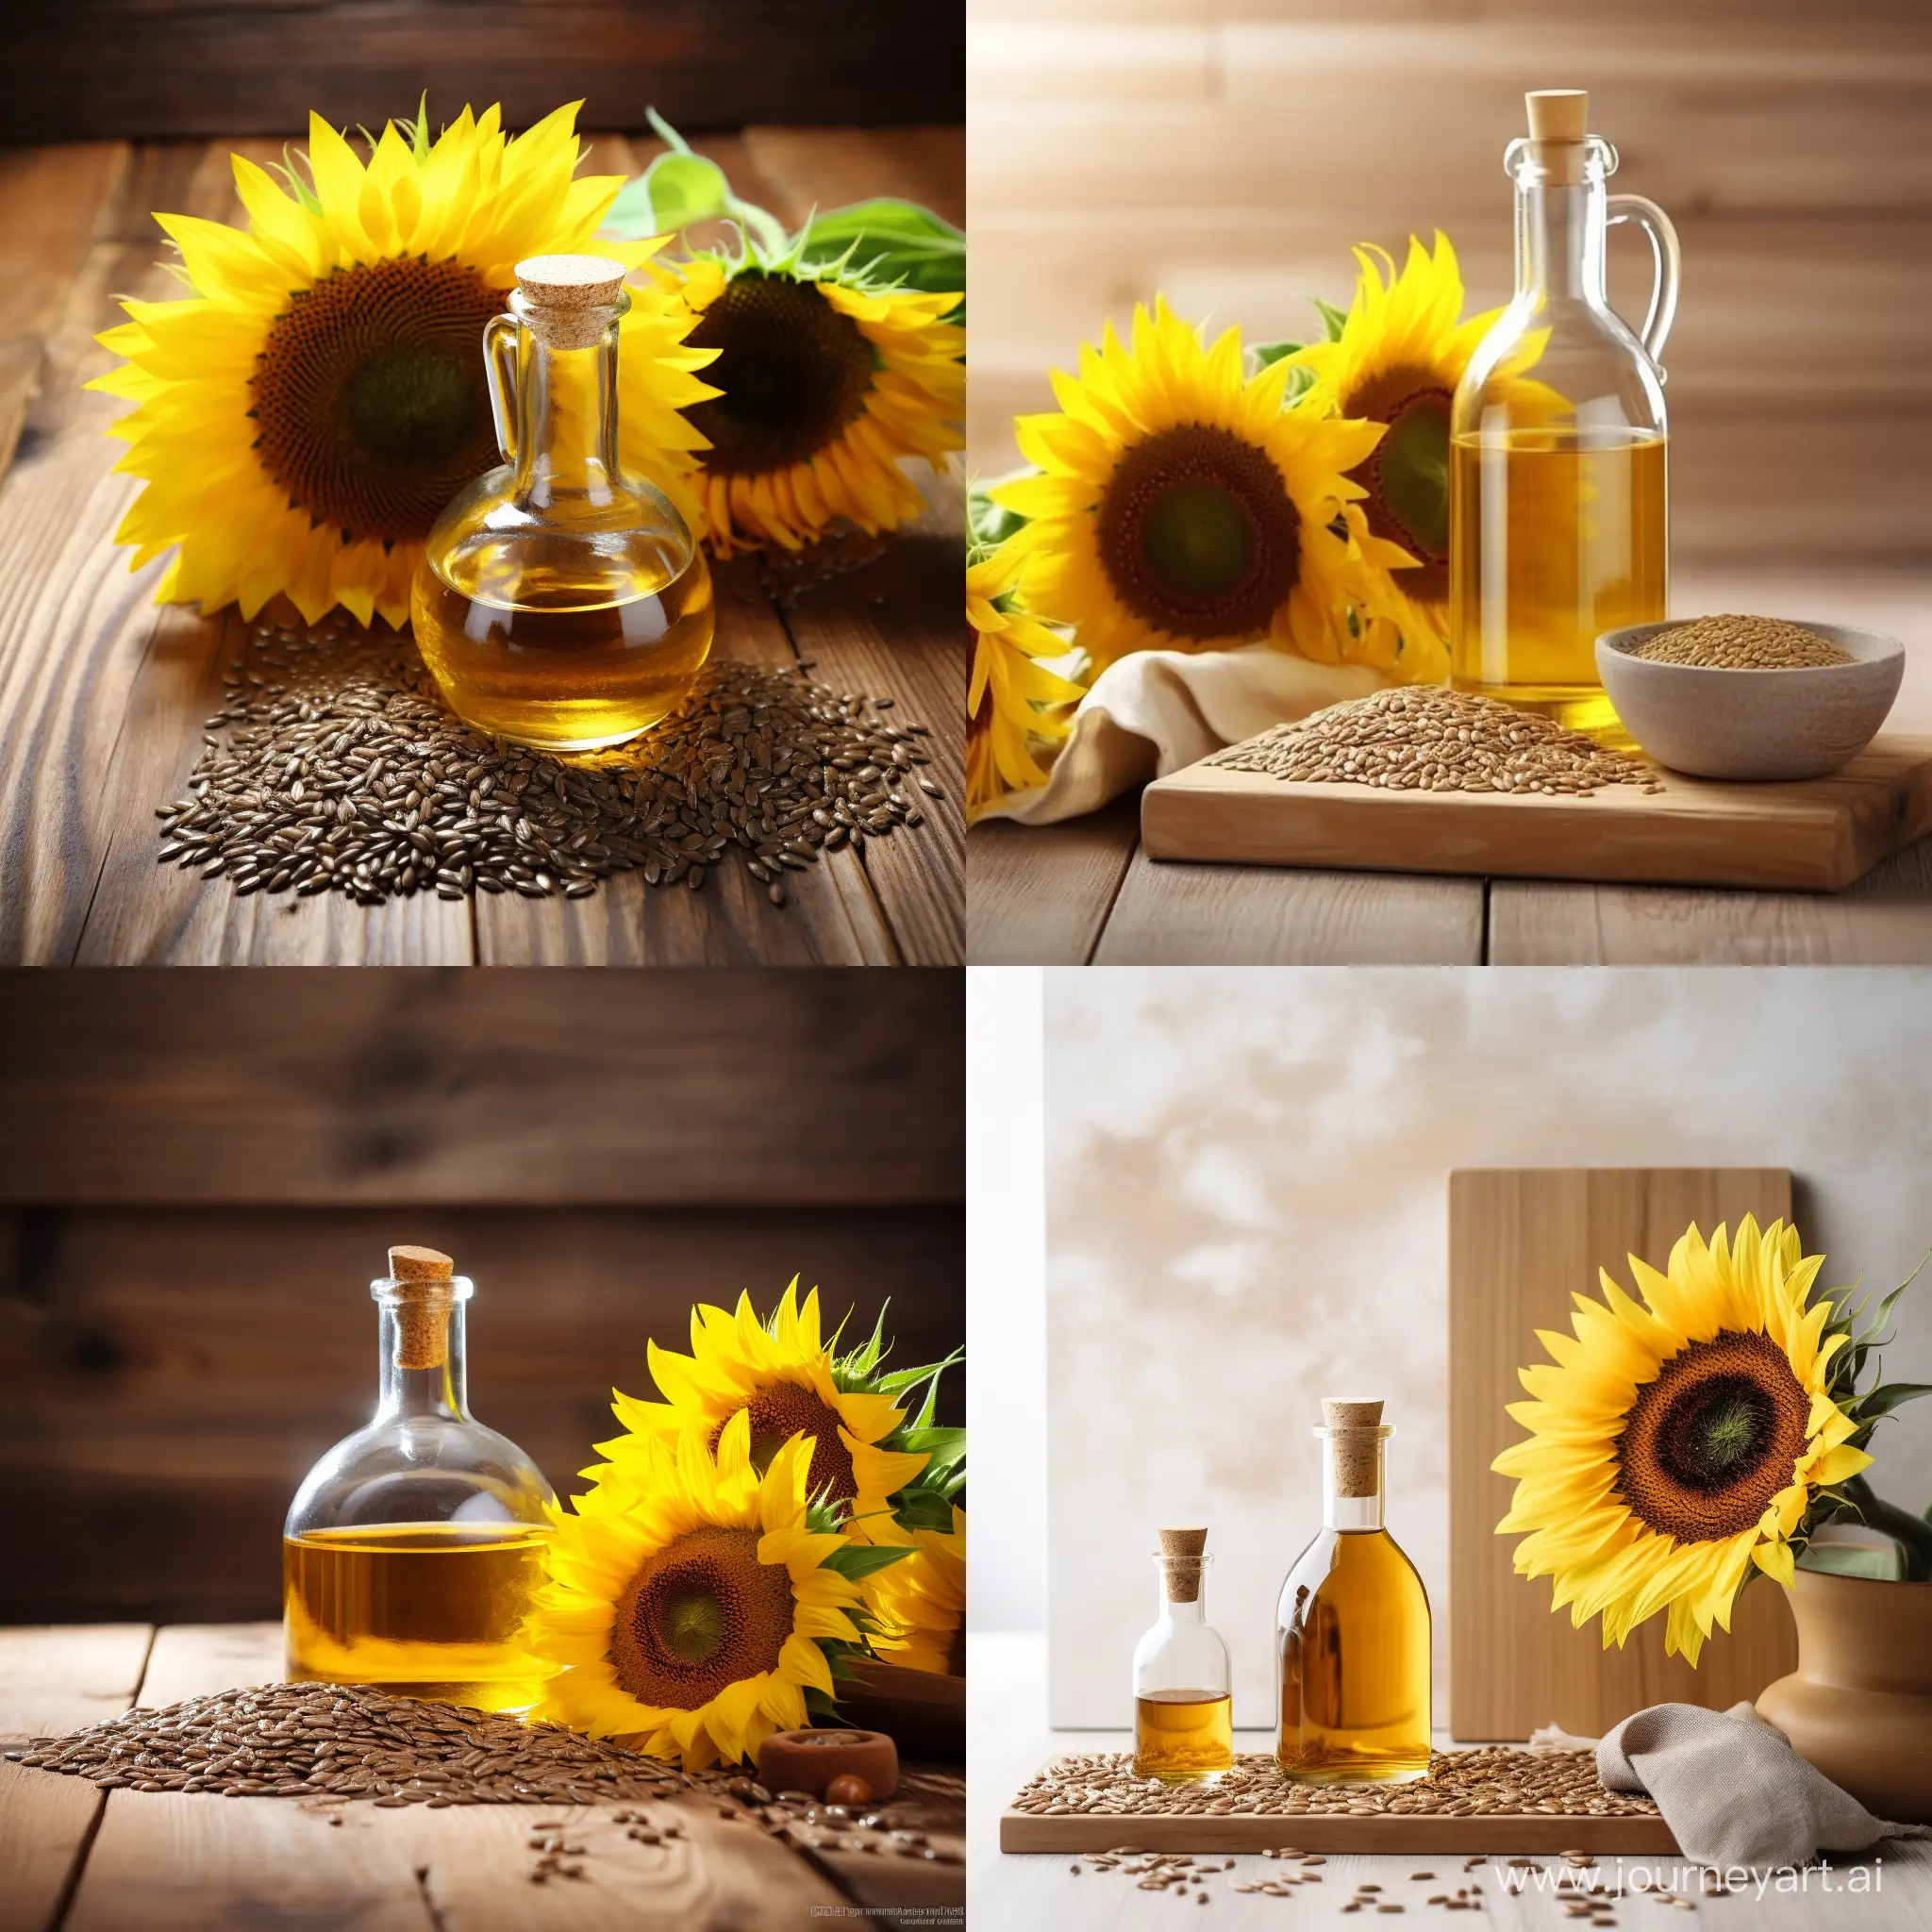 create a visually captivating and high-quality product image for a variety of oil seeds, including sunflower, sesame, castor, and flax seeds against a rustic wooden table backdrop to suggest natural and organic quality. Integrate a soft, warm light to accentuate the golden tones of the seeds and give a sense of morning sunlight, evoking freshness. Add a clear glass oil bottle filled with golden oil, subtly reflecting the pile of seeds it corresponds to, placed beside each pile. Ensure the seeds are in focus with a slightly blurred background to keep the attention on the product.